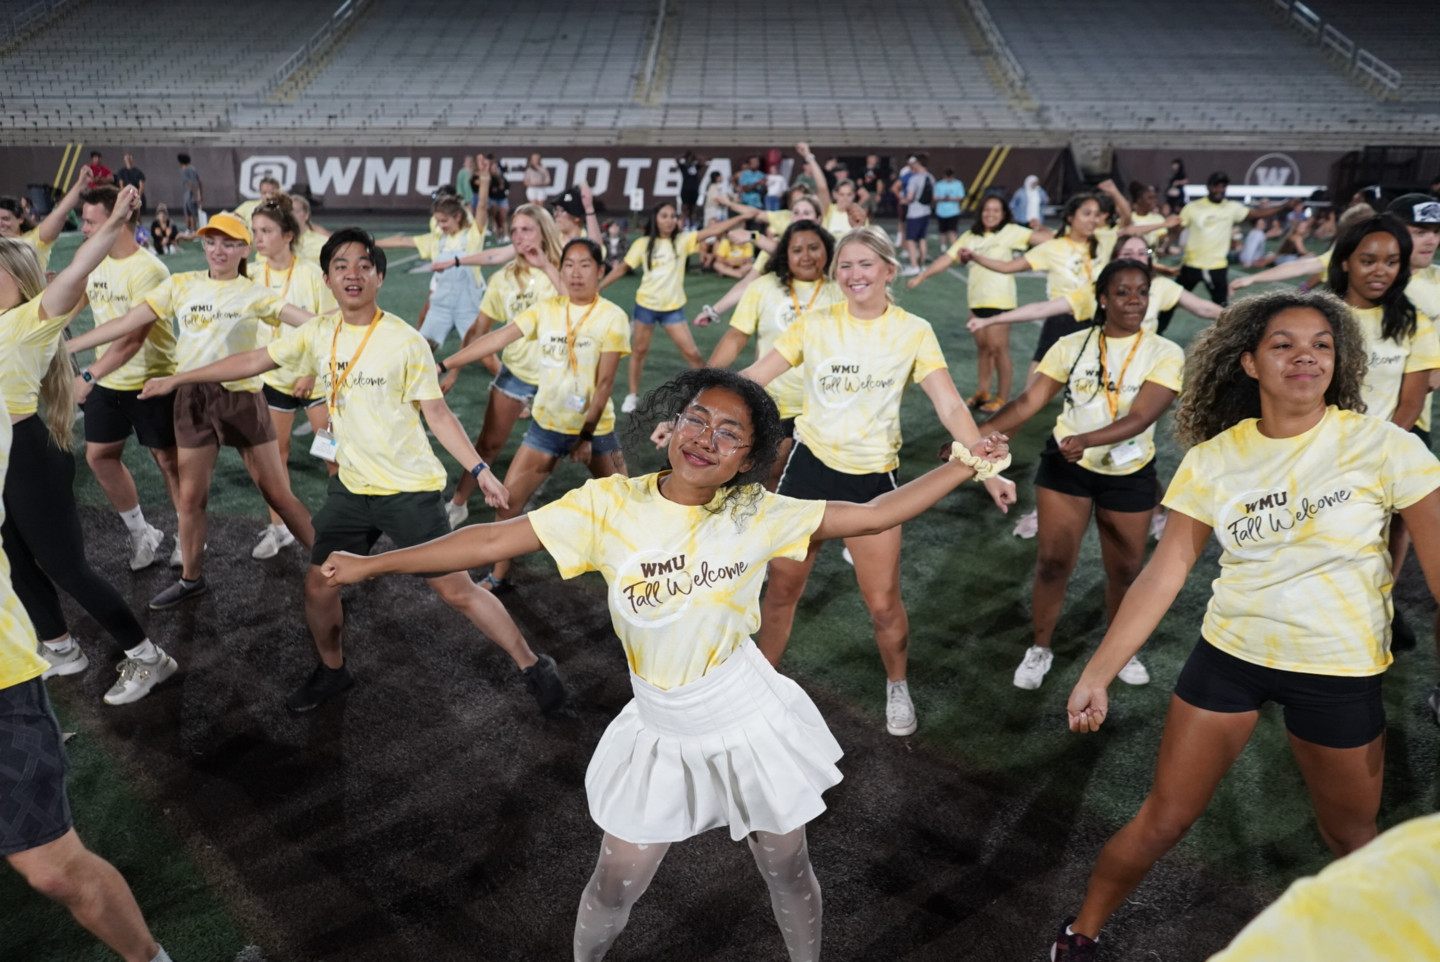 A group of students dances on the field.